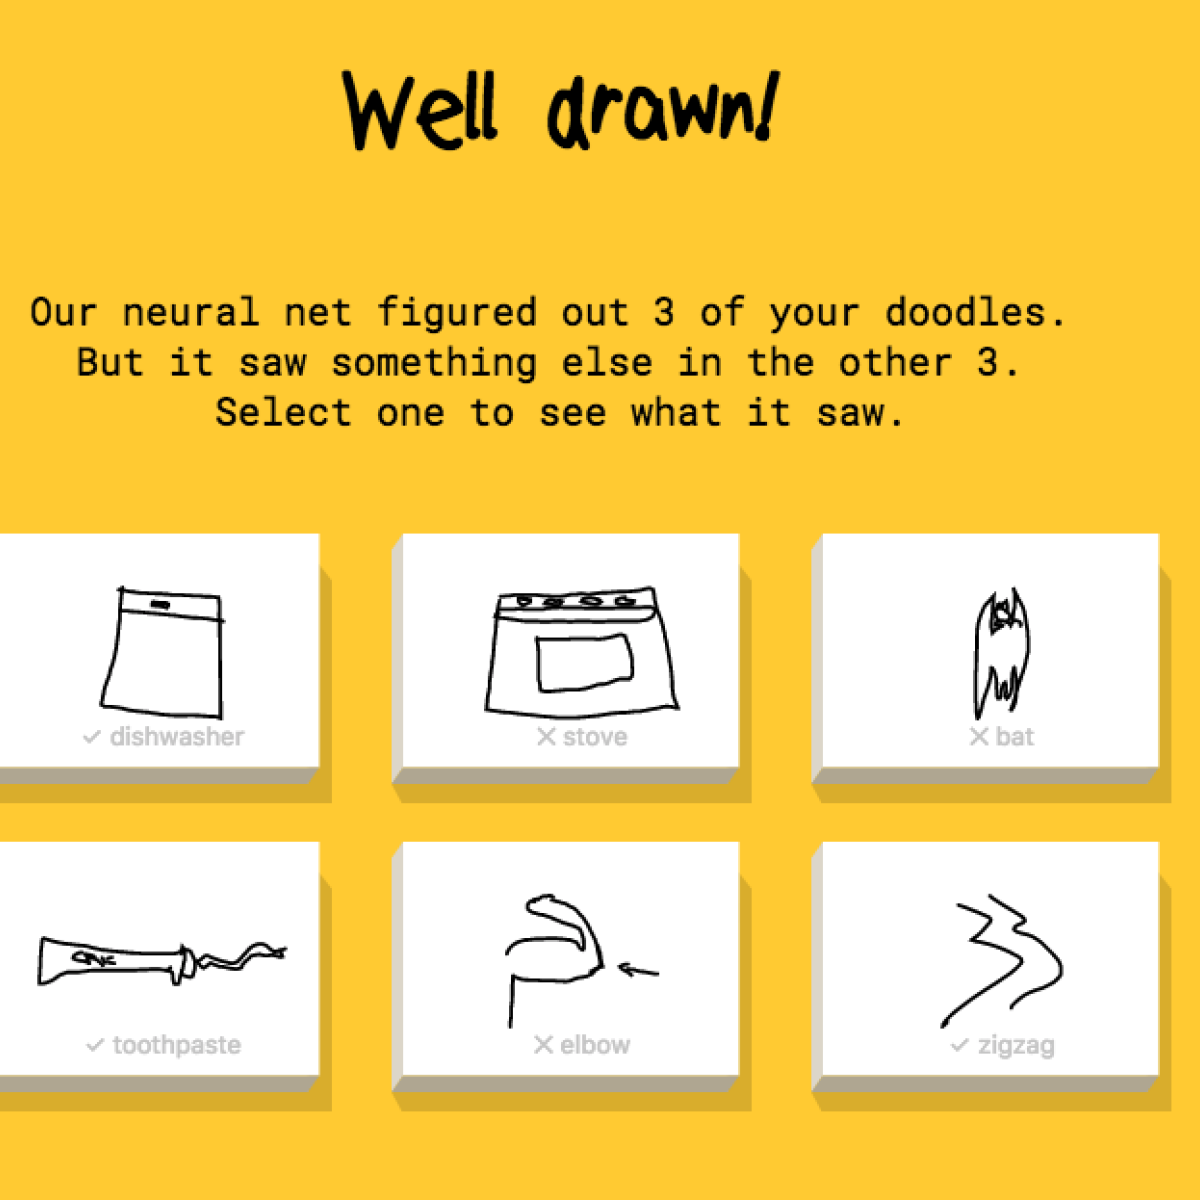 Google launches AutoDraw For Those Who Love Doodling And Want To